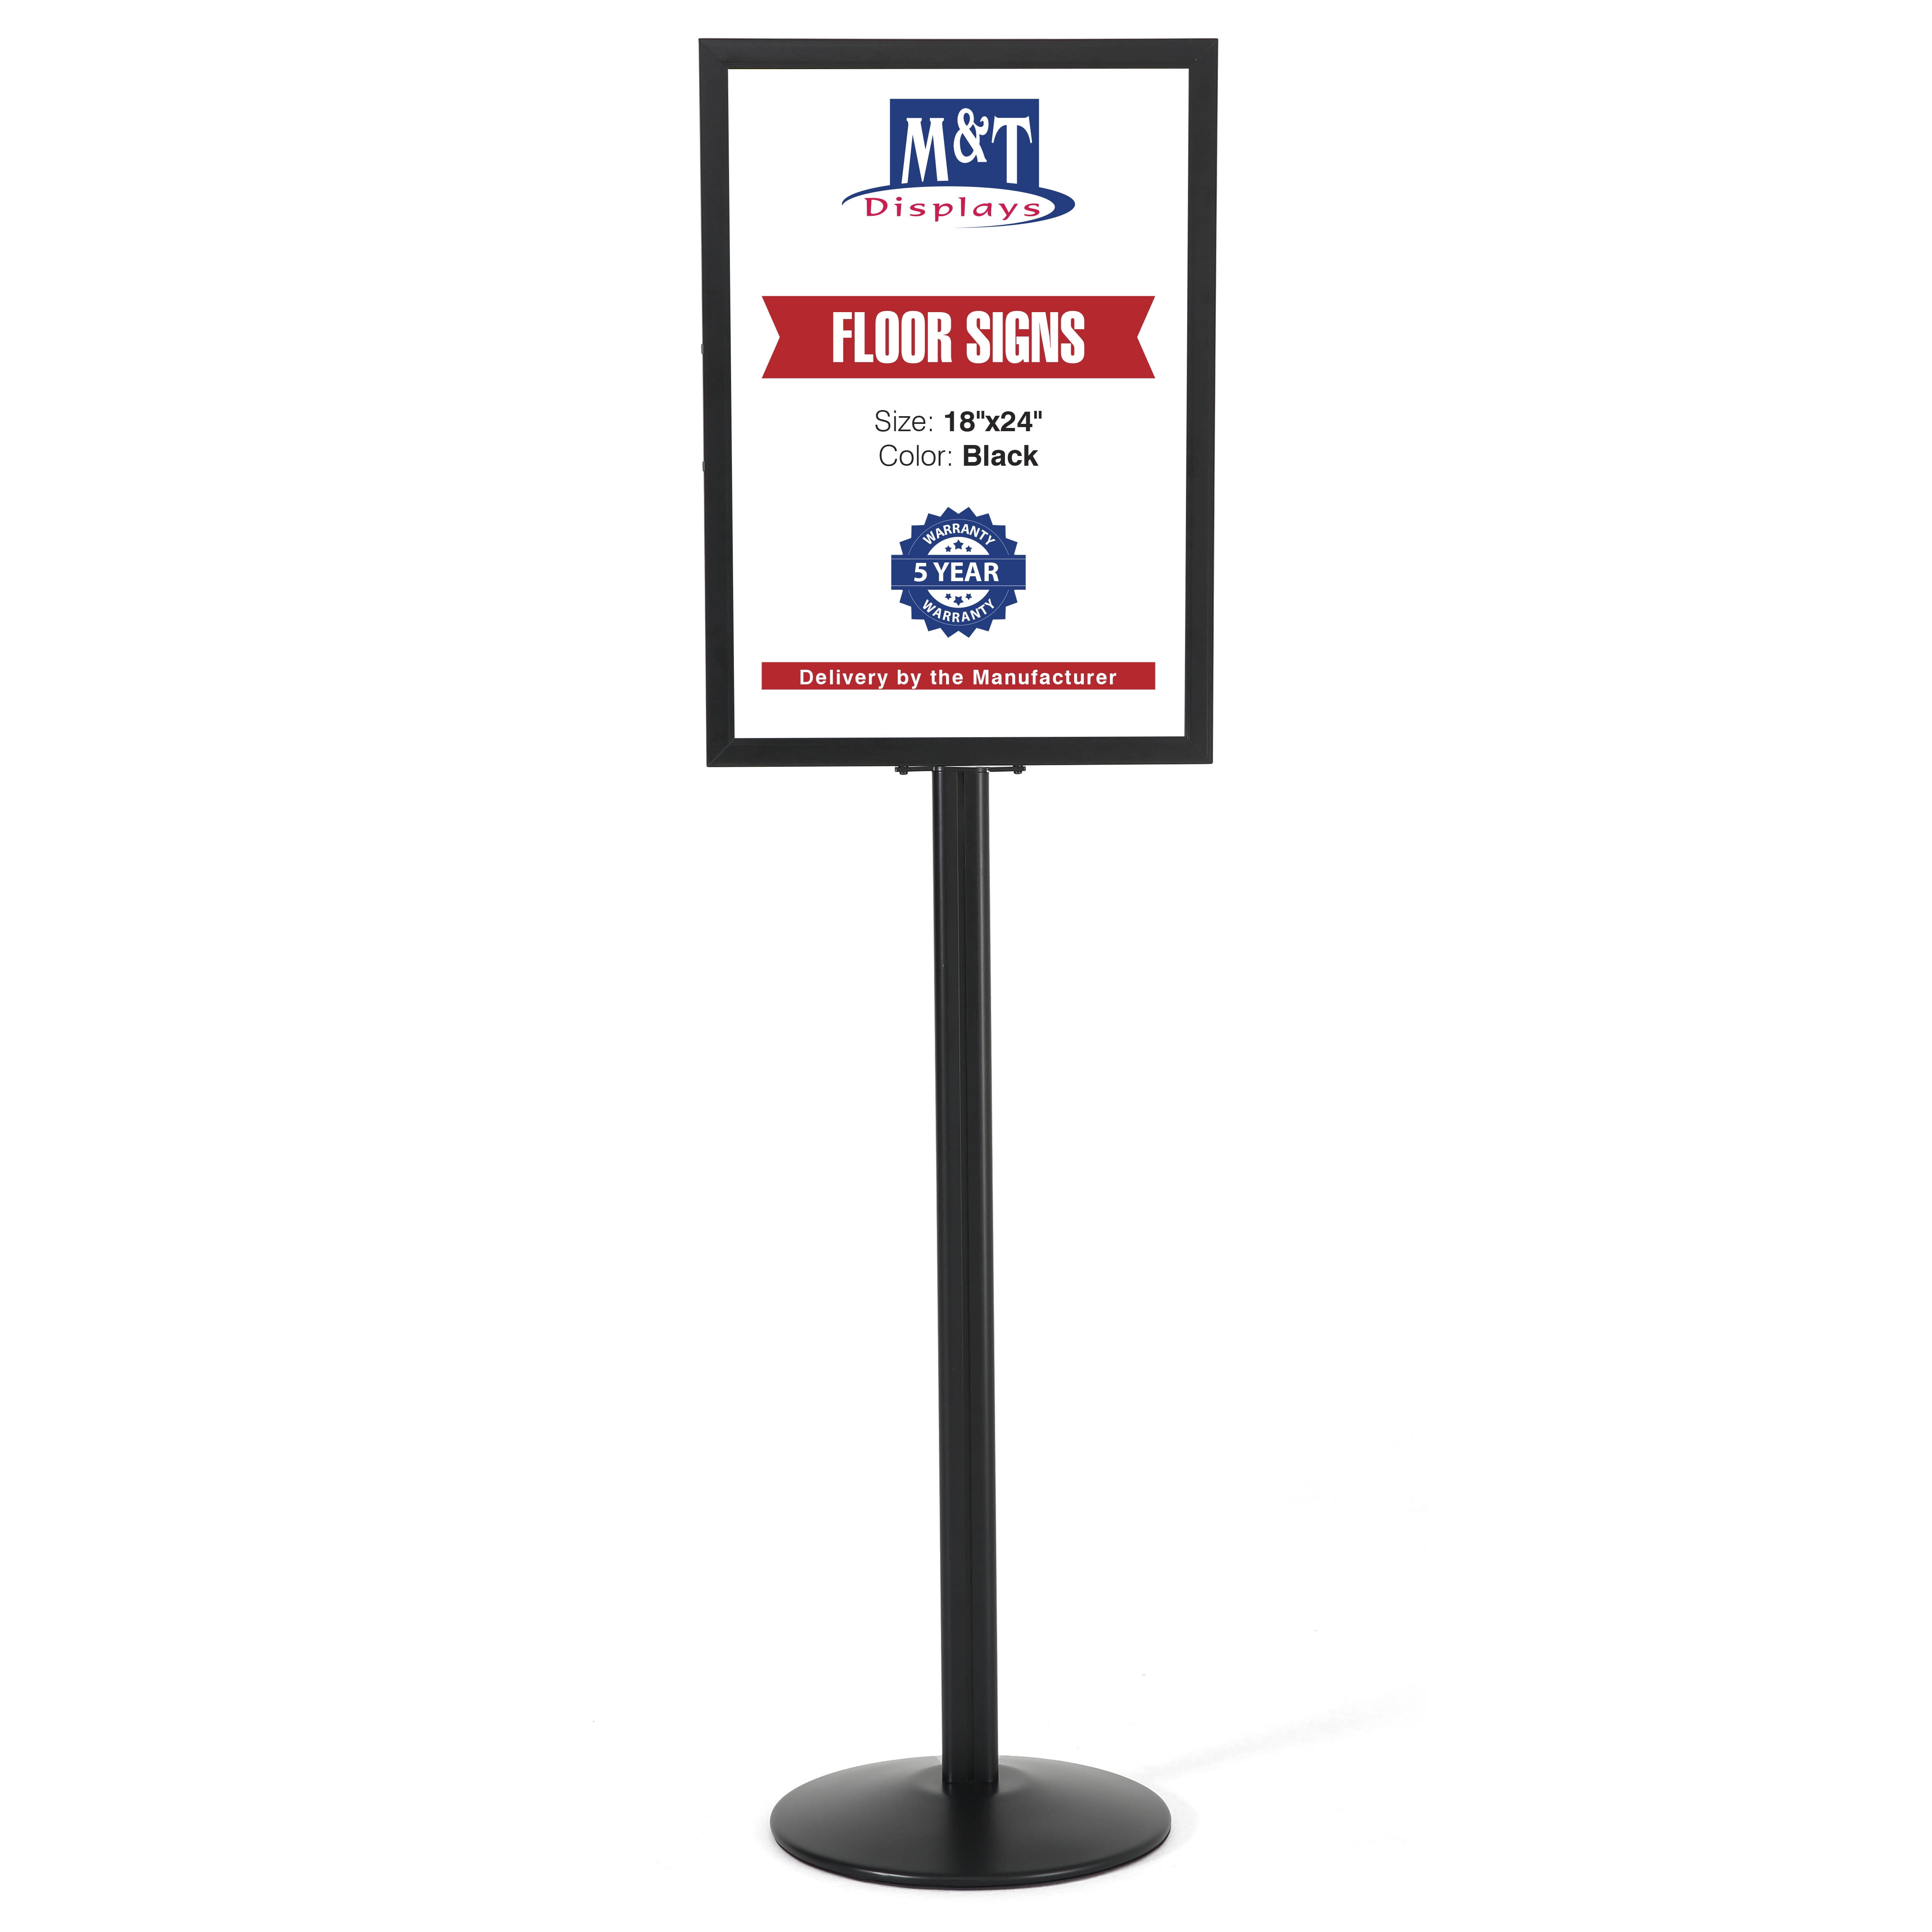  Sign stand for display, 8.5 x 11 Sign holder floor stand,  Adjustable poster sign stand with heavy duty pedestal for vertical &  horizontal view, Sign holder for signs, posters (